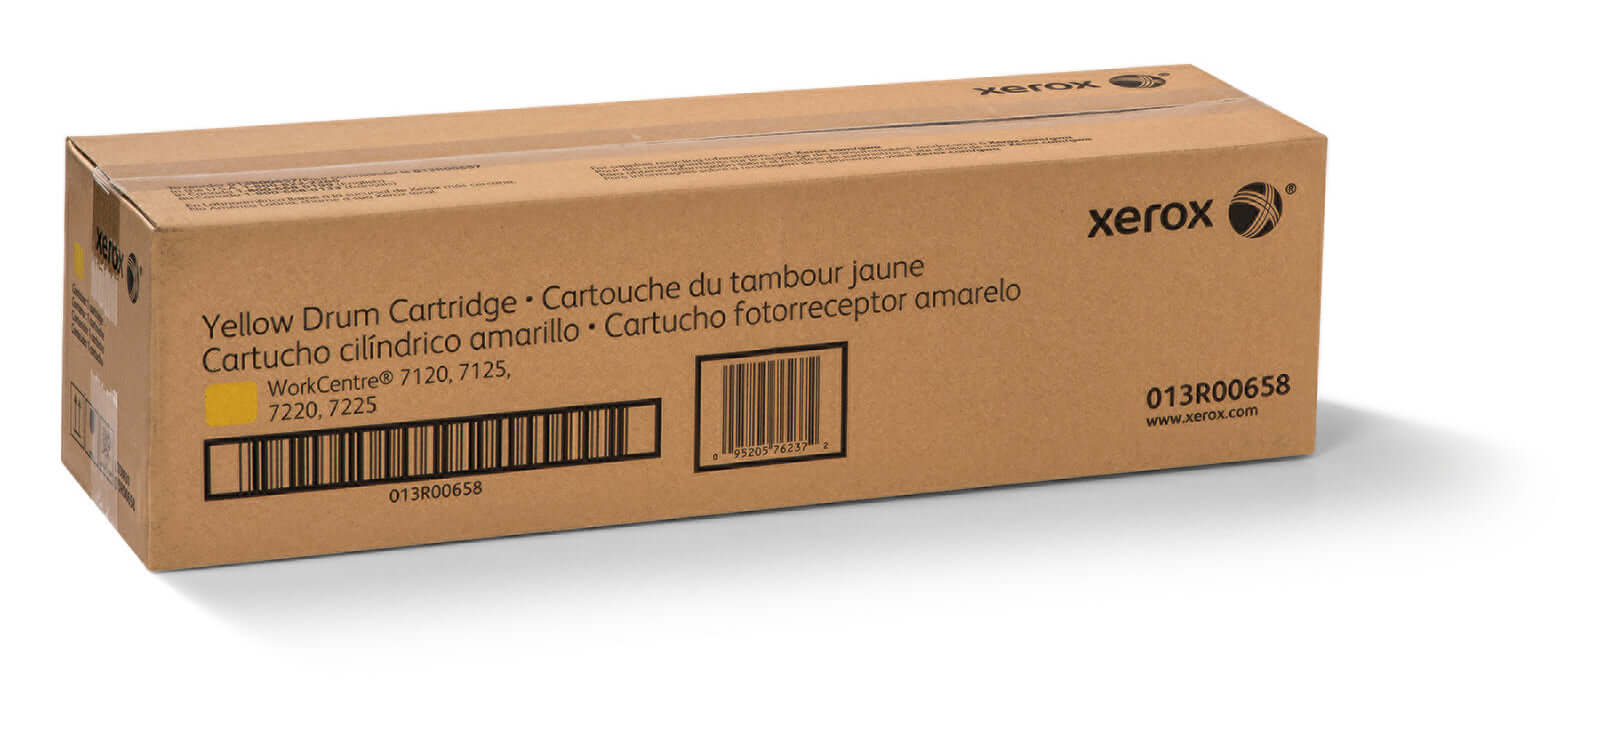 Xerox Yellow Drum Cartridge (51,000) 013R00658 for WorkCentre 7120/7125/7220/7225/7220i/7225i